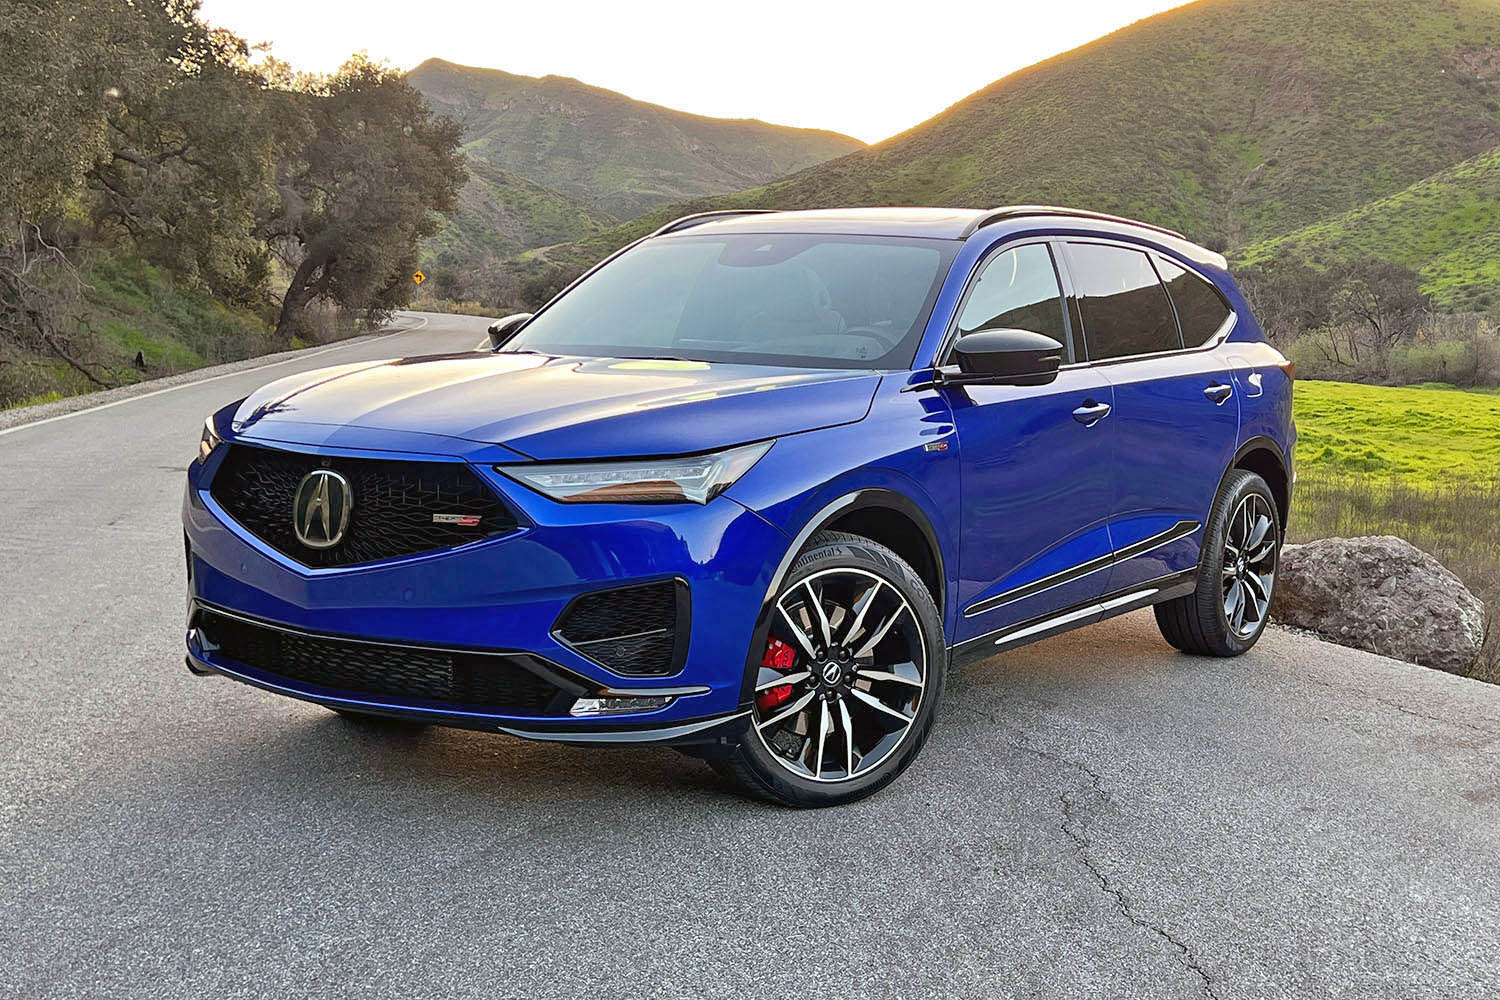 2023 Acura MDX Type S in Apex Blue Pearl, front three-quarter view.